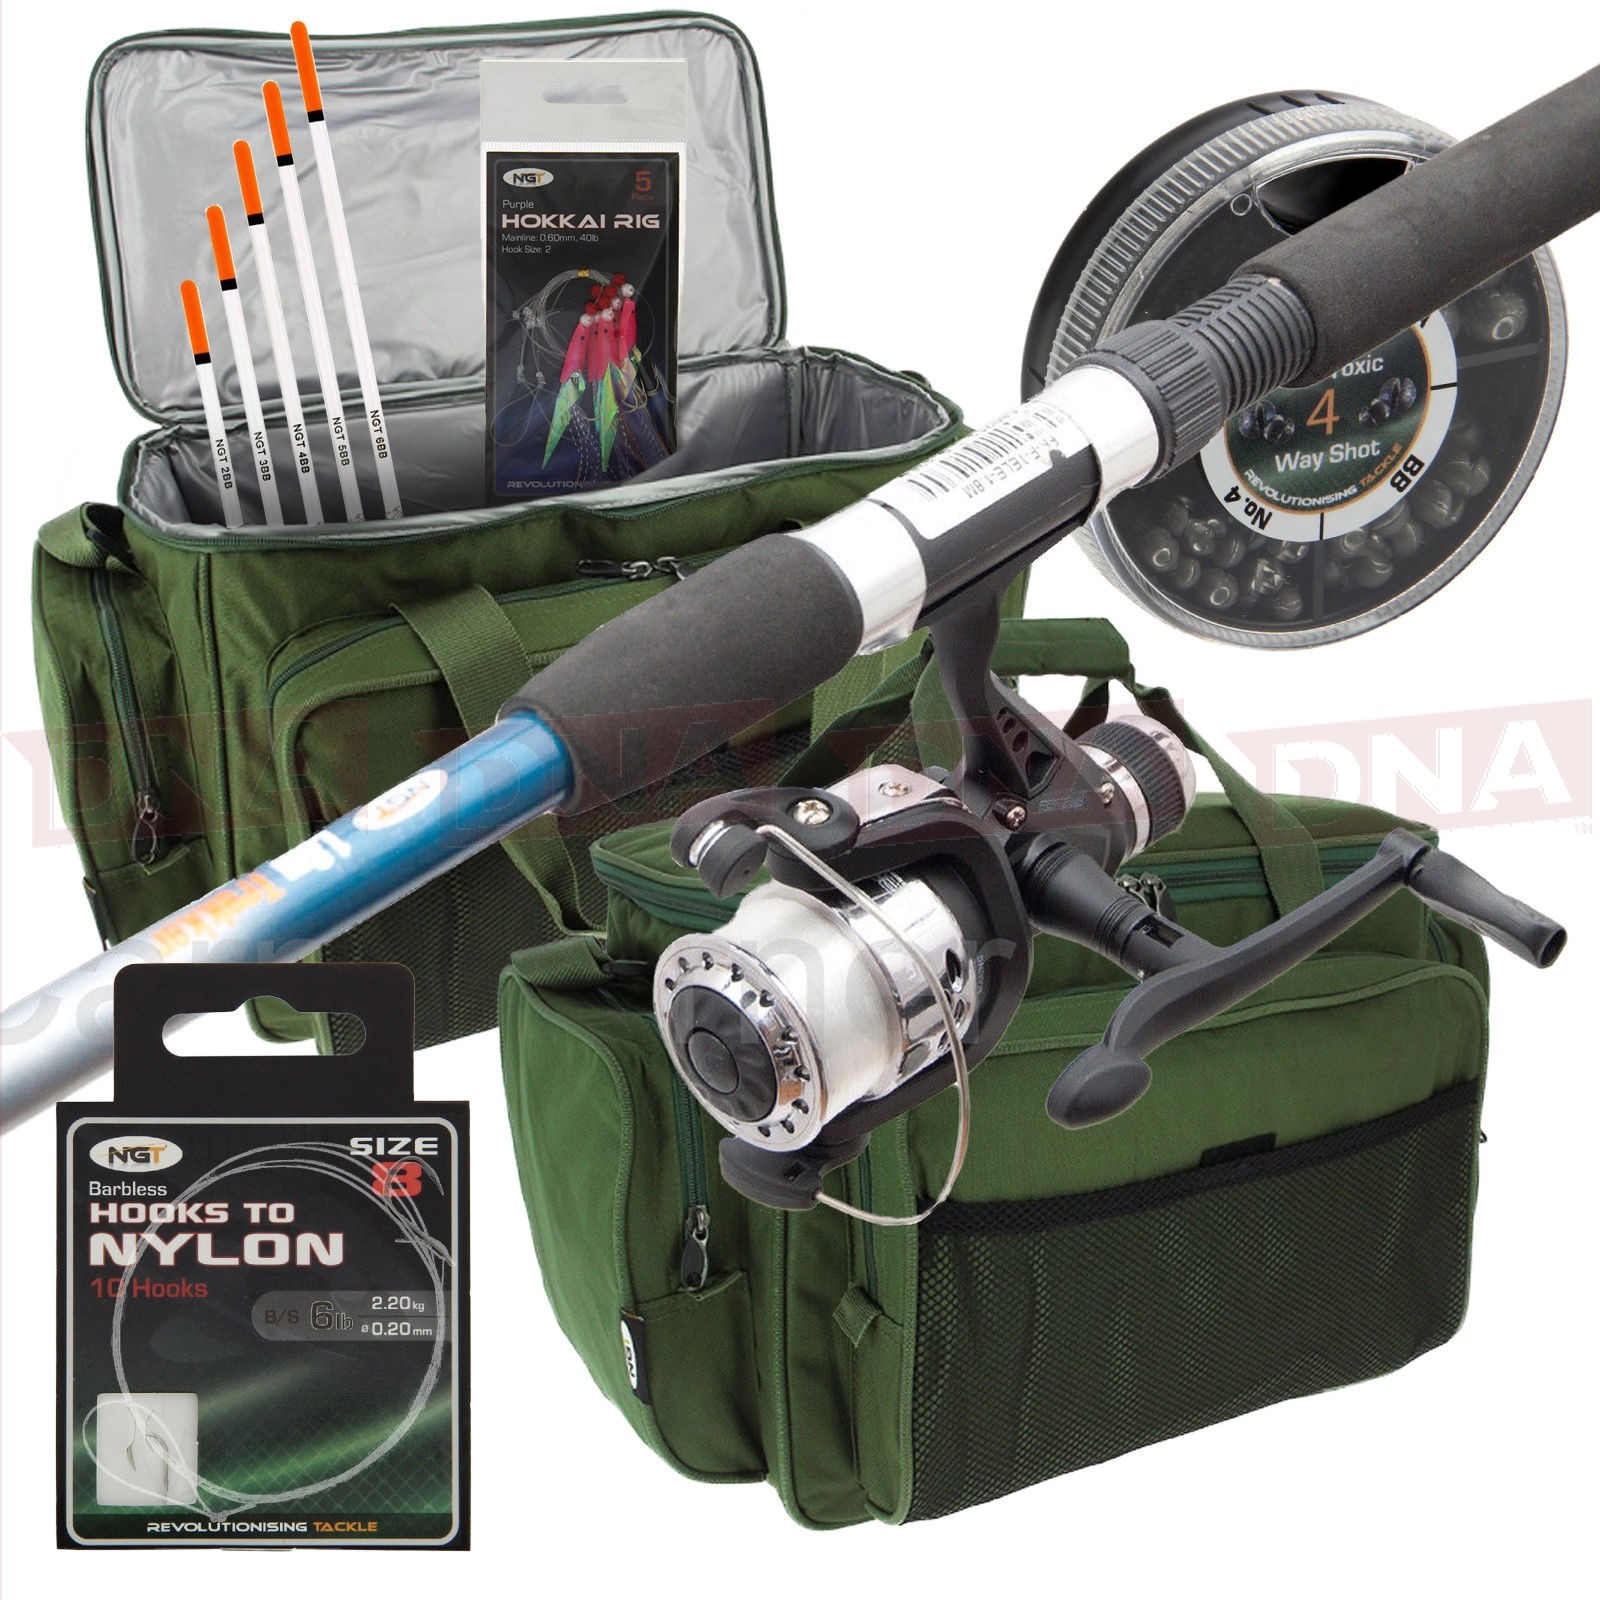 https://www.dnaleisure.co.uk/media/product/40e/6ft-telescopic-travel-rod-with-carryall-and-tackle-0f1.jpg